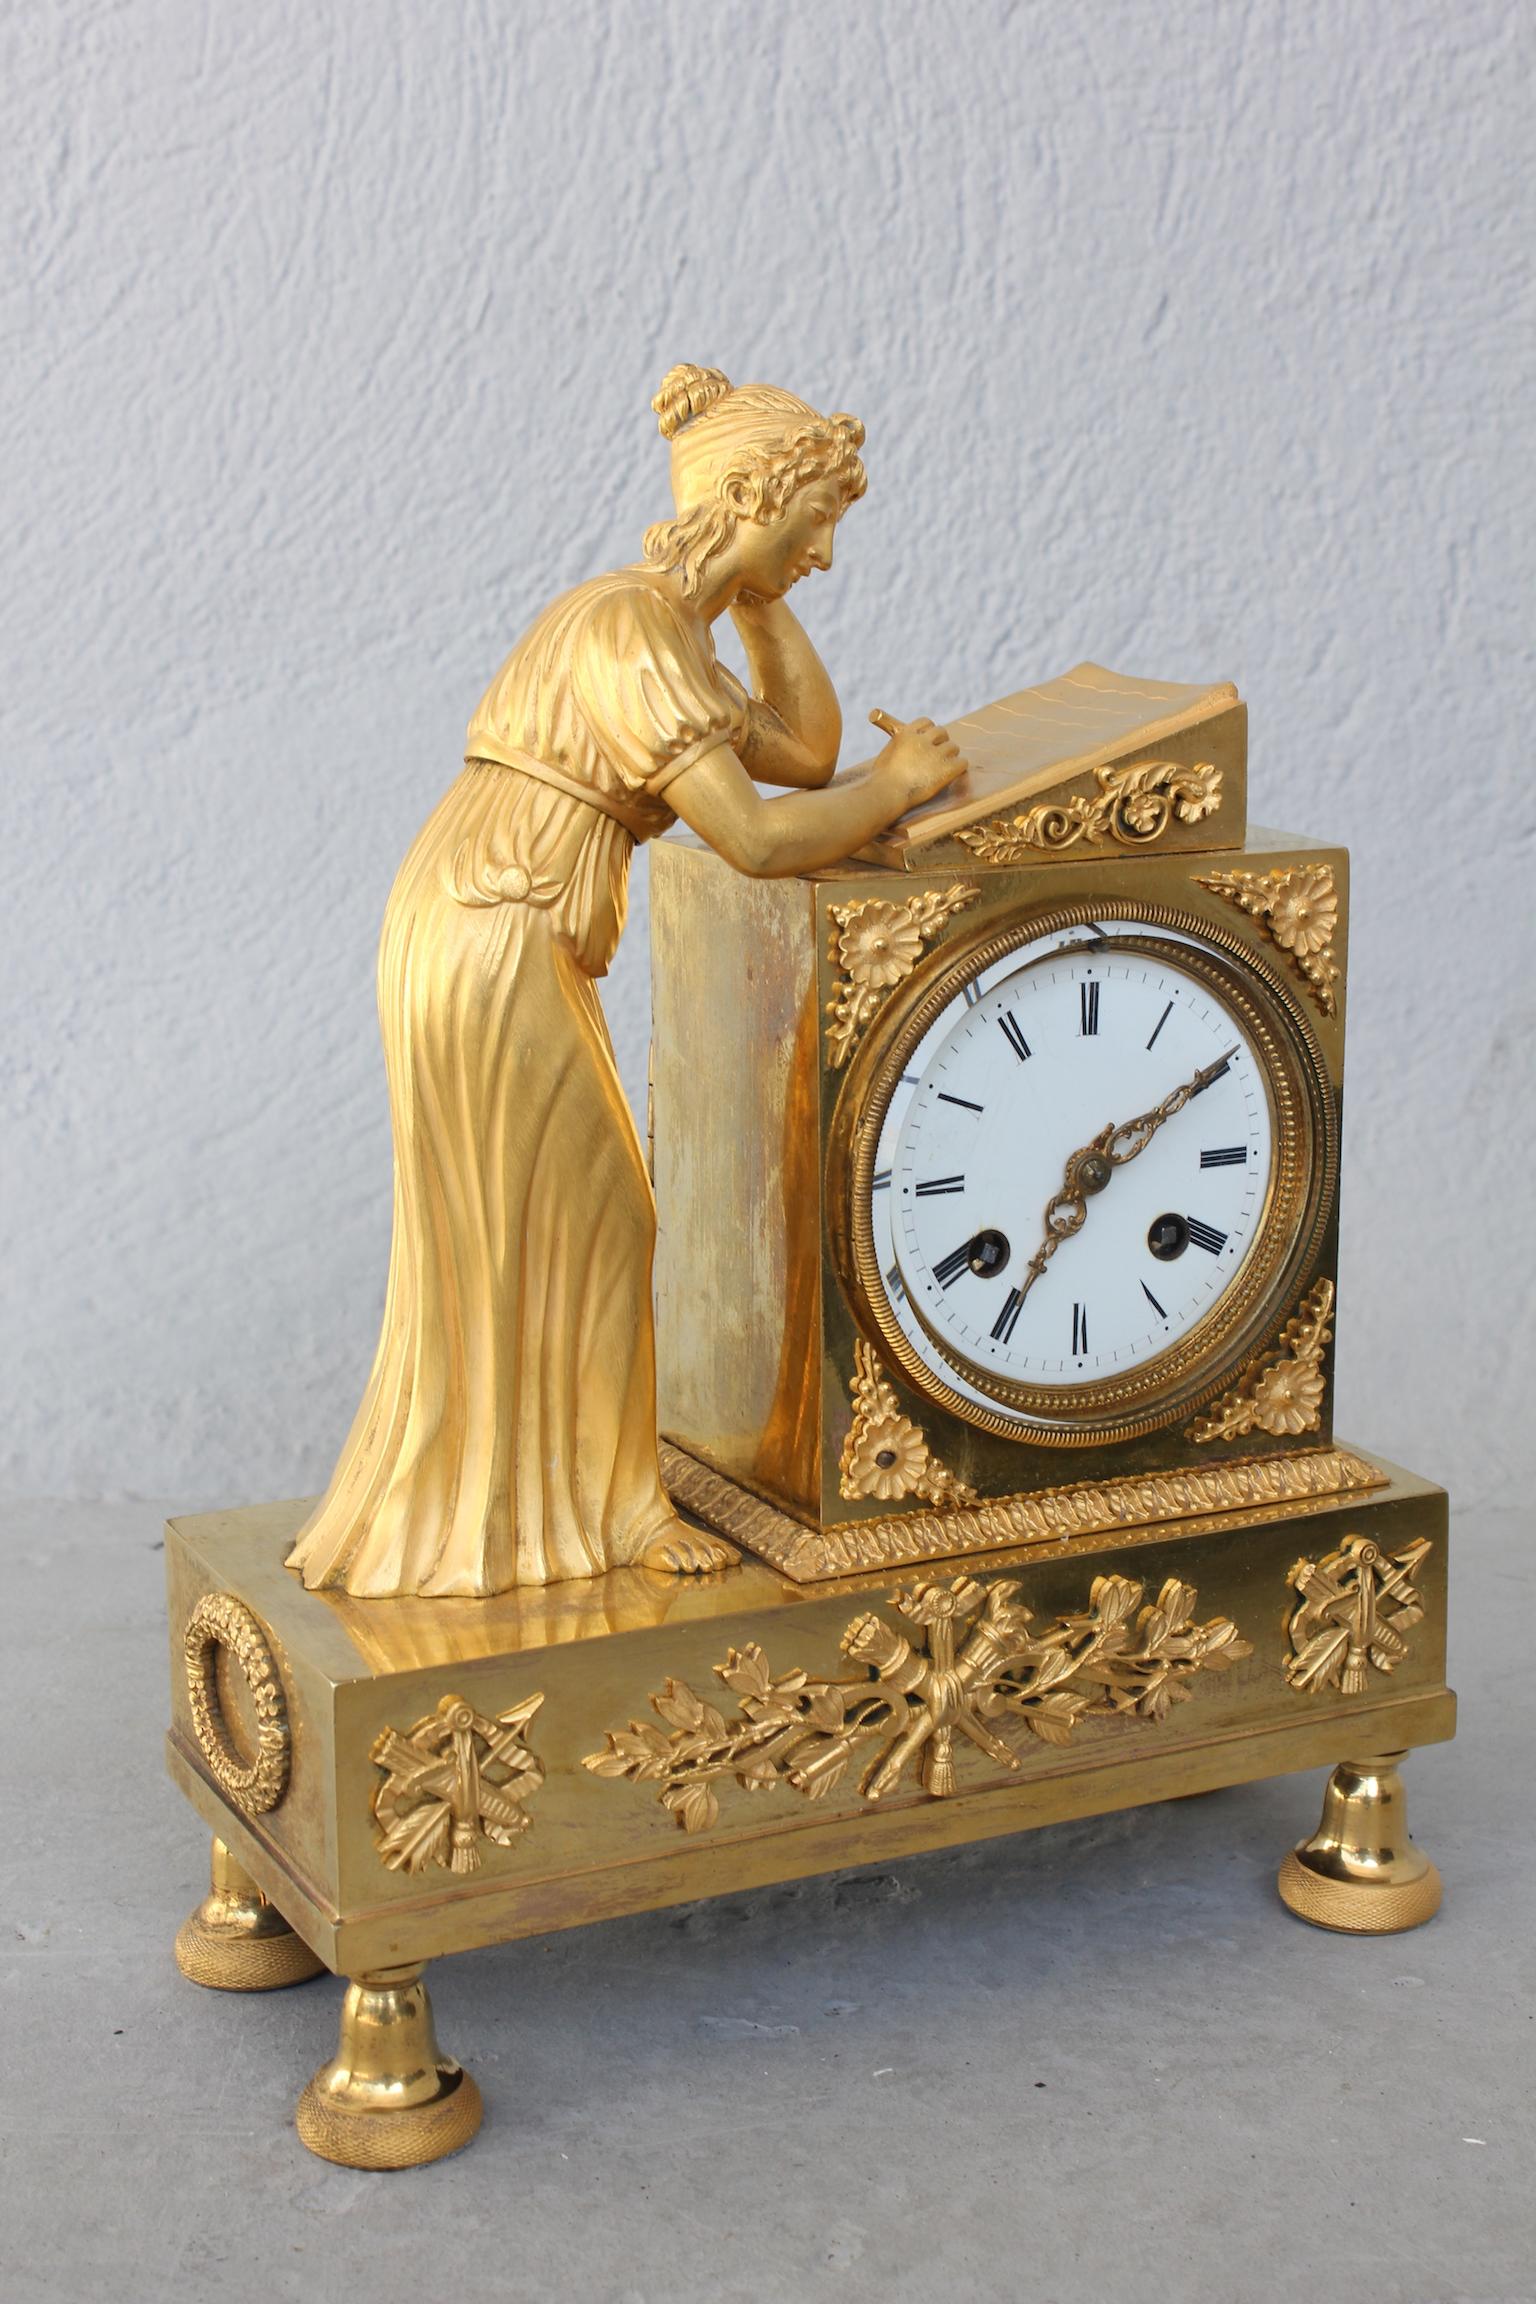 19th century clock representing a woman writing.
Complete and functional movement.
Dimension: Height 30cm, width 23cm, depth 10cm.